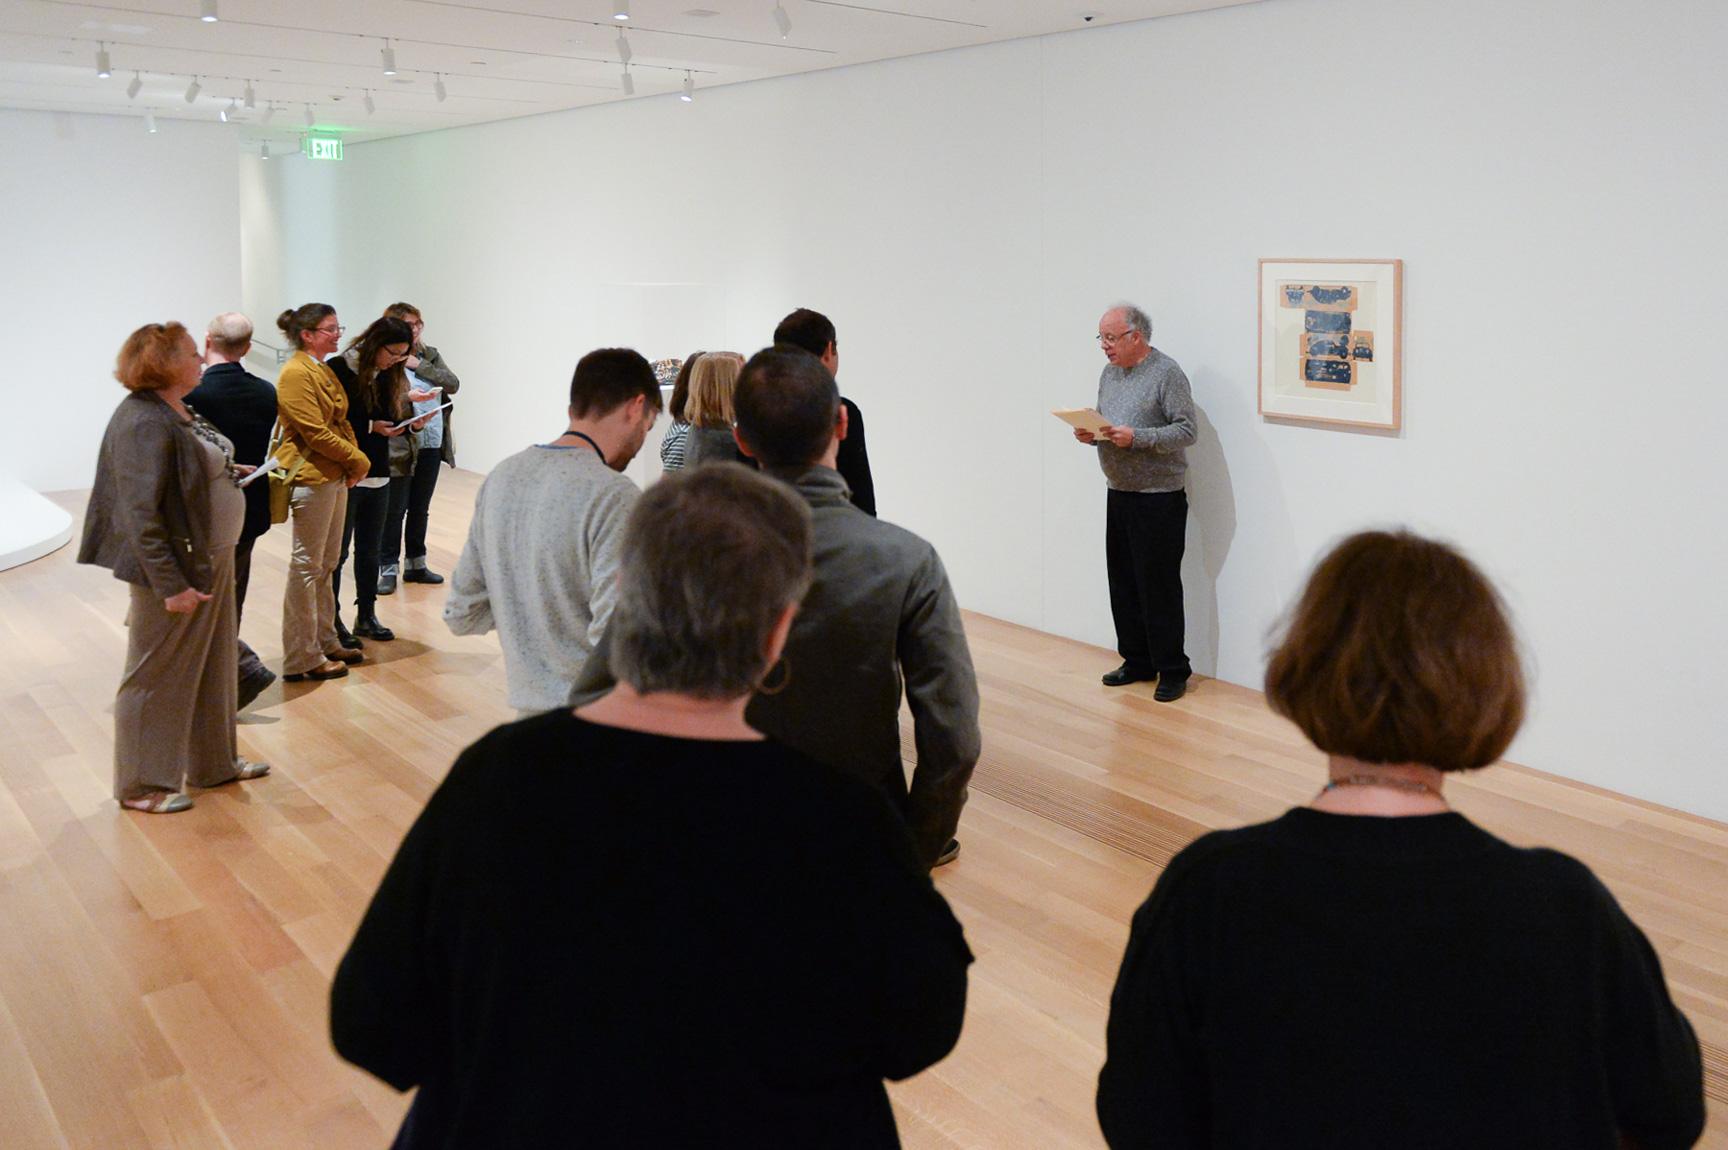 Buzz Spector gives a lecture in a lower-level gallery to an audience in front of Claes Oldenburg’s drawing, "The Airflow - Top and Bottom, Front, Back and Sides, to be Folded into a Box (Study for Cover of Art News)."